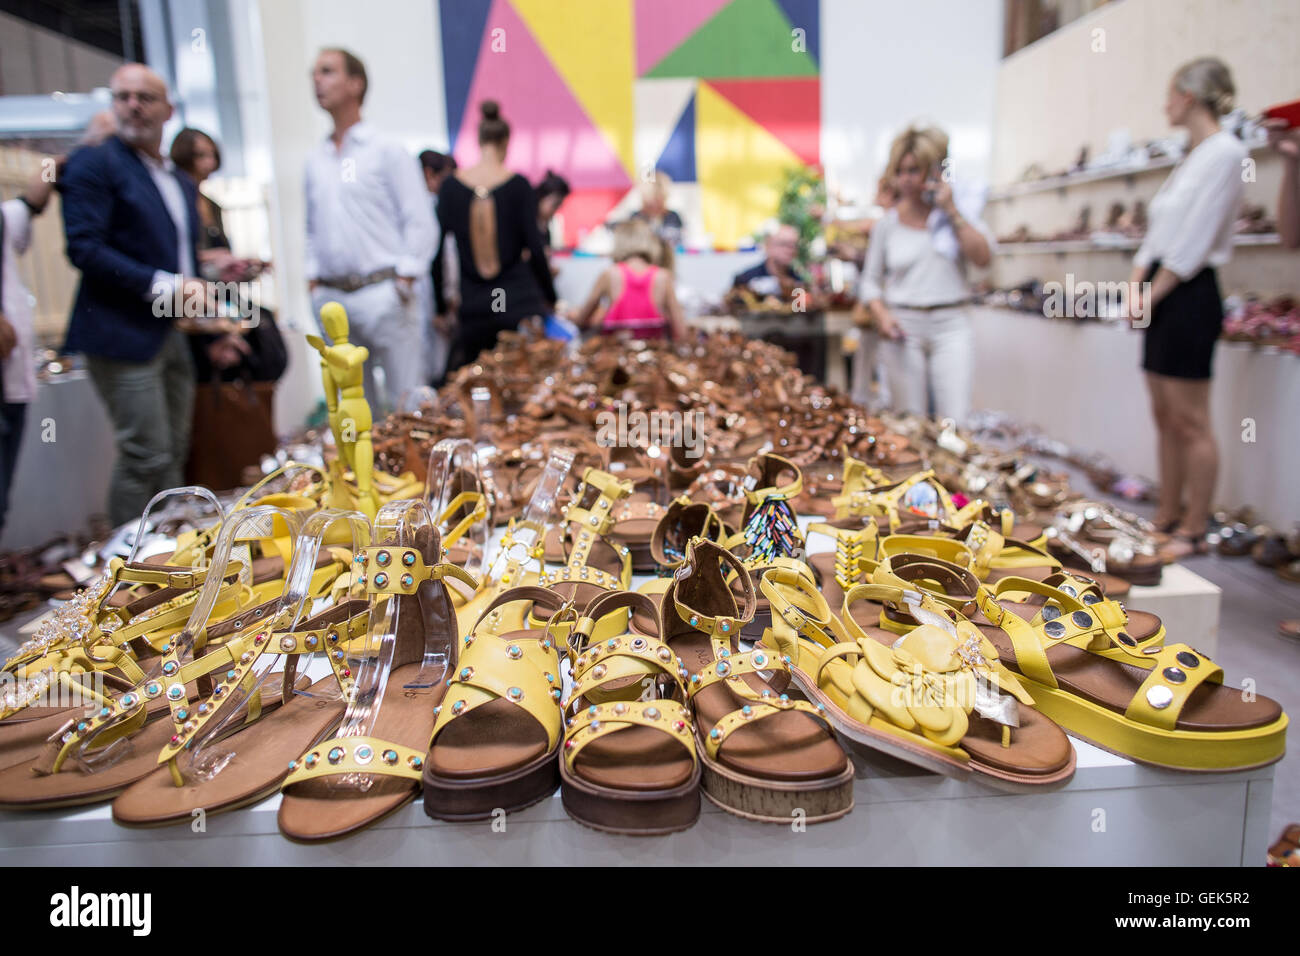 Duesseldorf, Germany. 26th July, 2016. Sandals of the manufacturer 'Inuovo'  can be seen at the shoe fair GDS in Duesseldorf, Germany, 26 July 2016.  PHOTO: MAJA HITIJ/dpa/Alamy Live News Stock Photo - Alamy